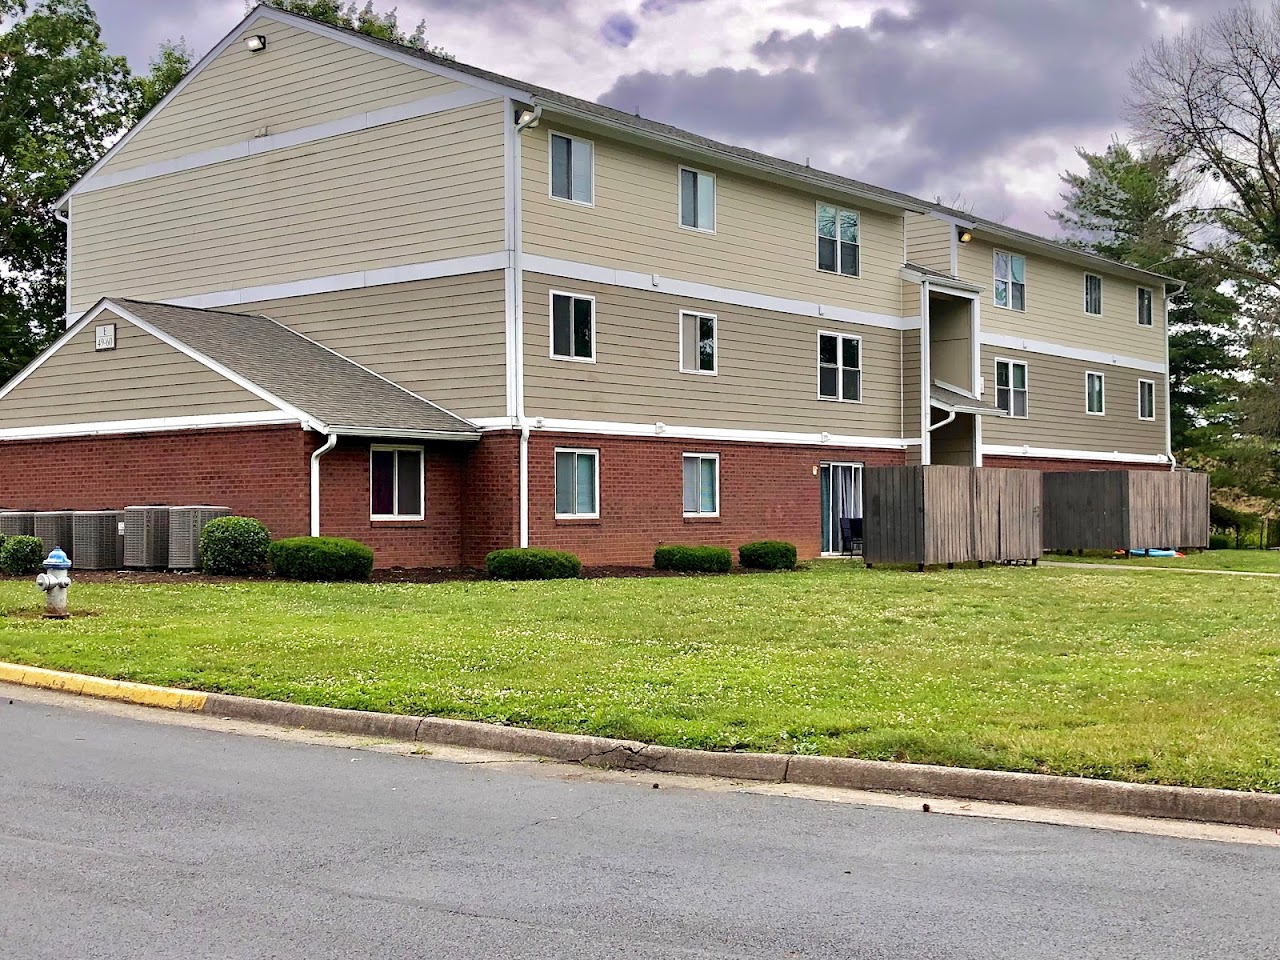 Photo of FERNCLIFF SOUTH at 3666 FERNCLIFF AVE NW ROANOKE, VA 24017